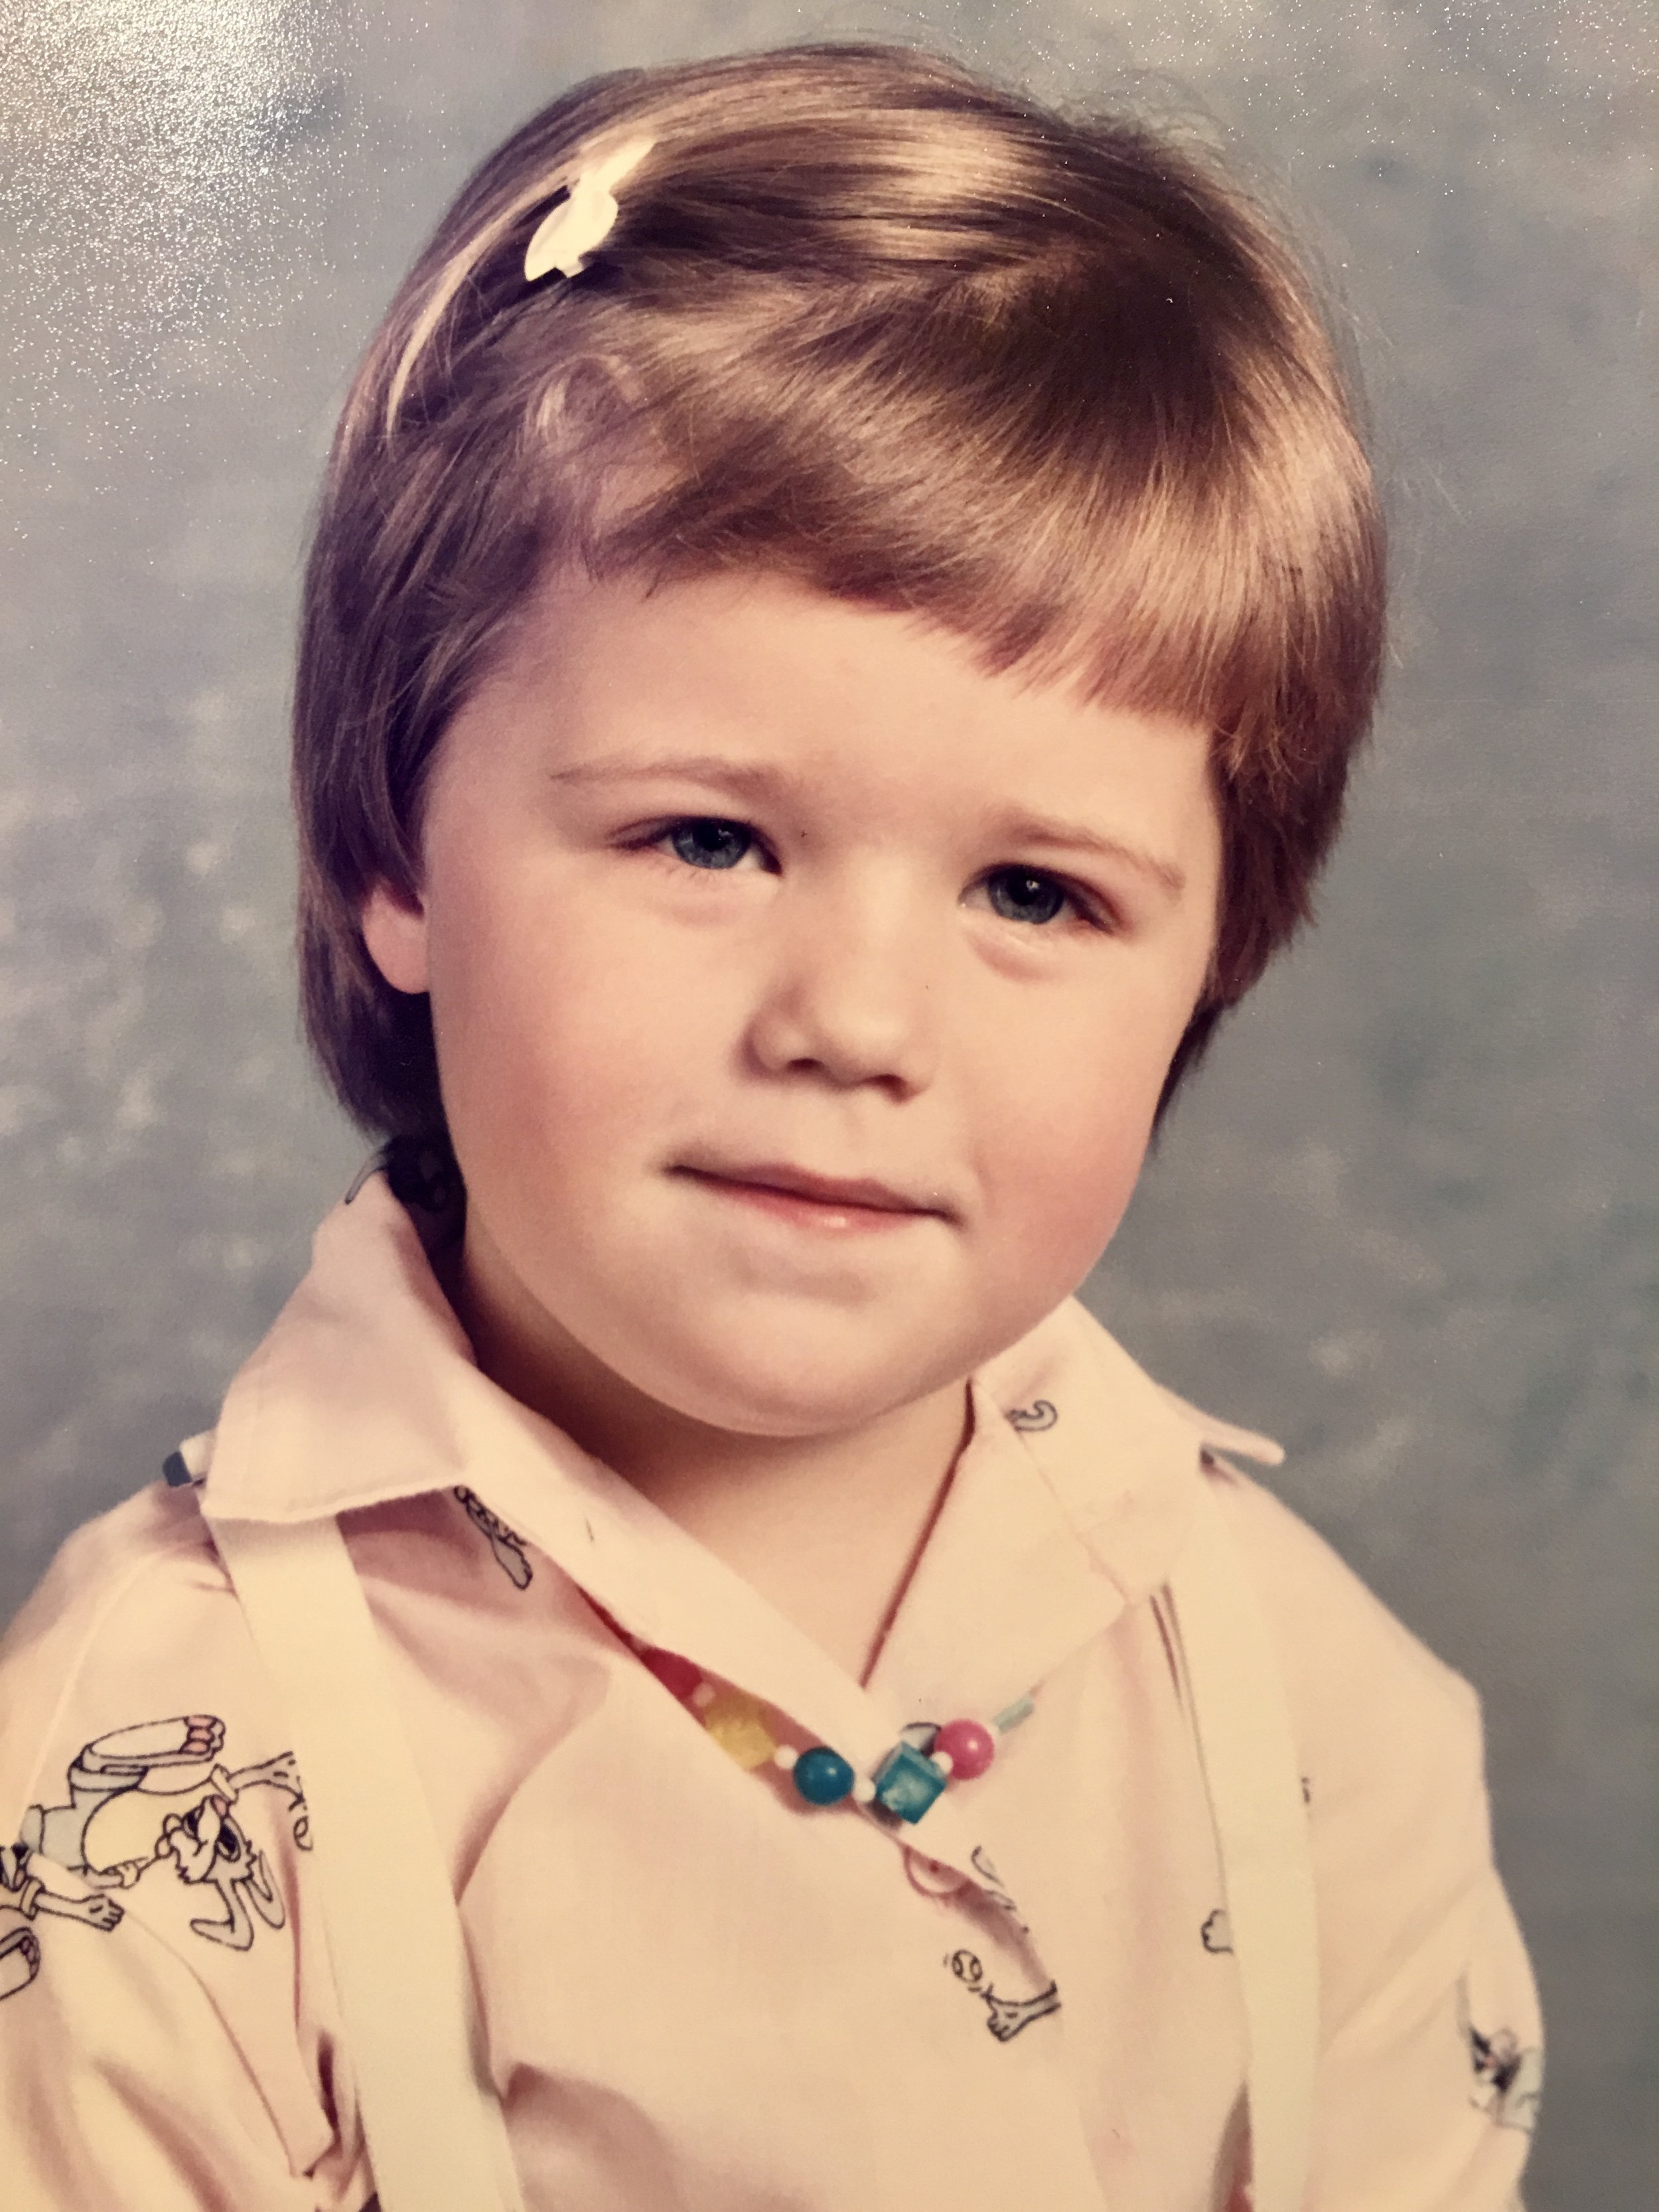  This is my favorite picture of little me. The small barrette, the necklace, the suspenders. Feels very put together. 